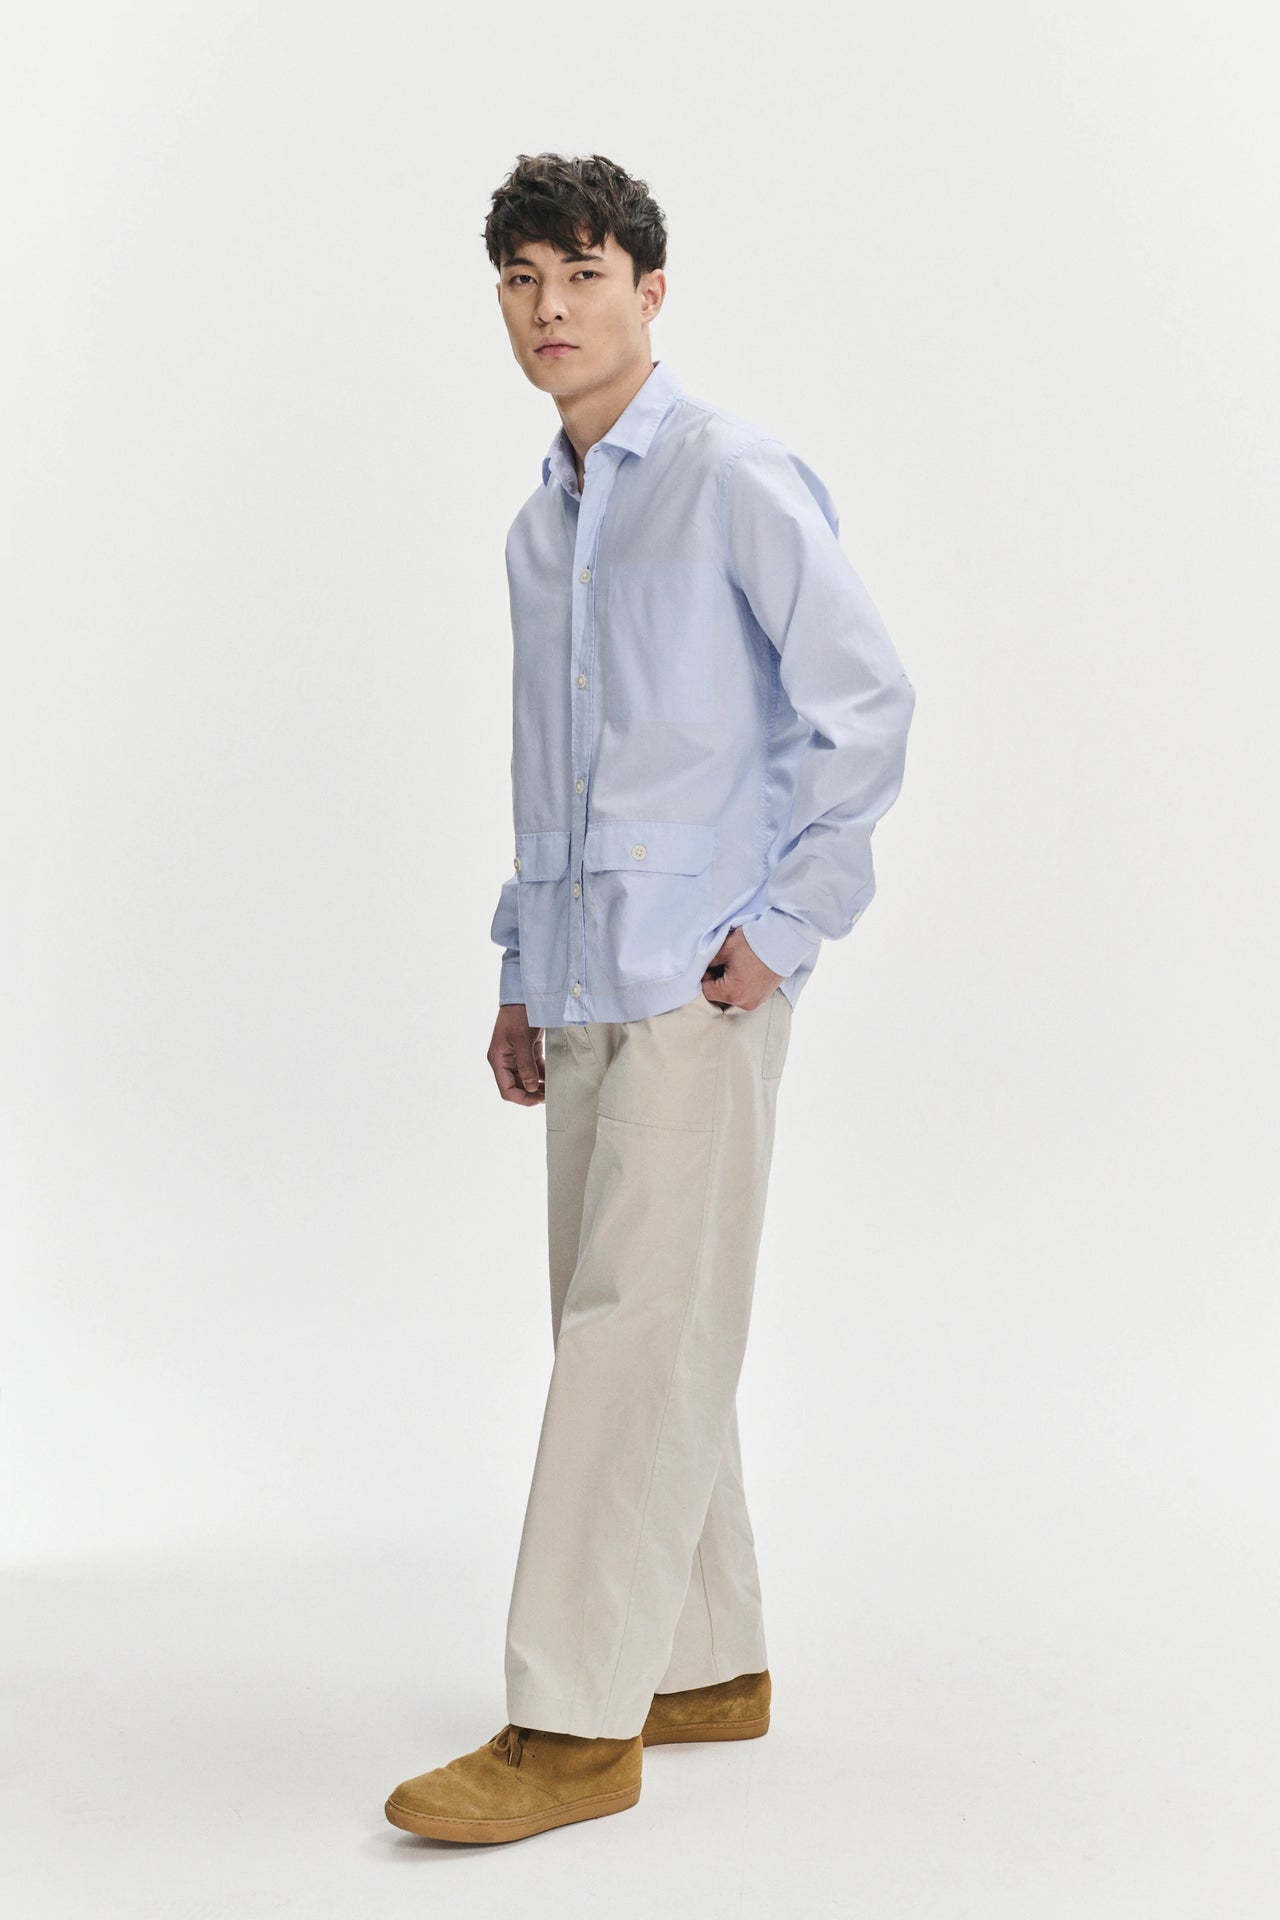 Overshirt in a Light Blue Portuguese Oxford Cotton